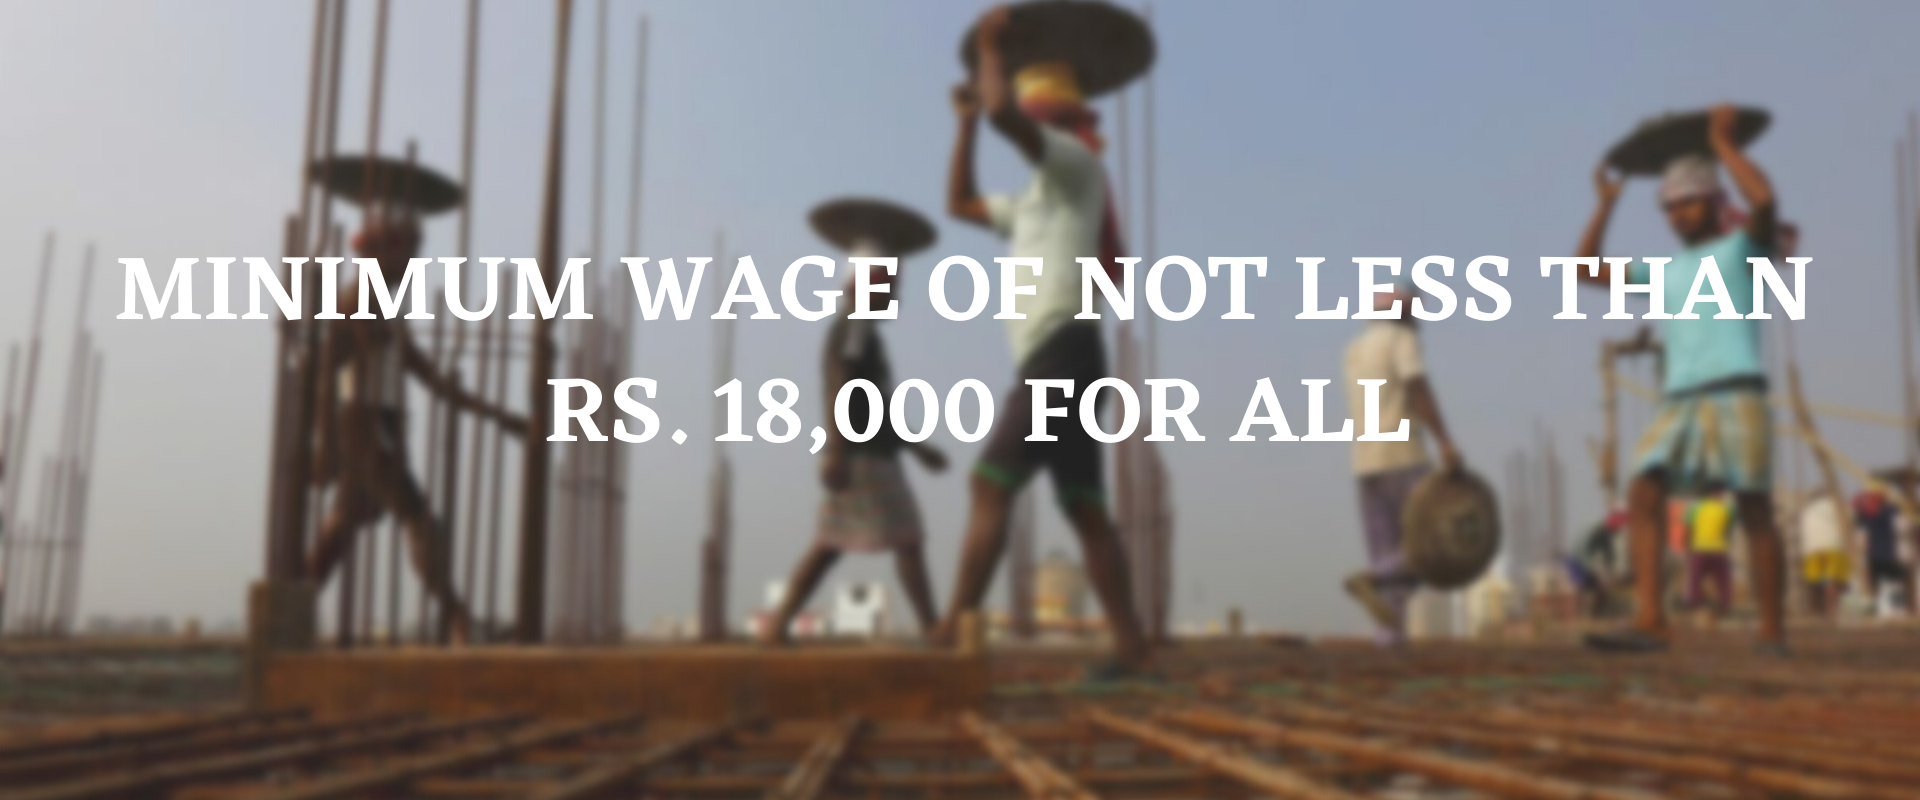 Minimum wage of not less than Rs 18000 for all